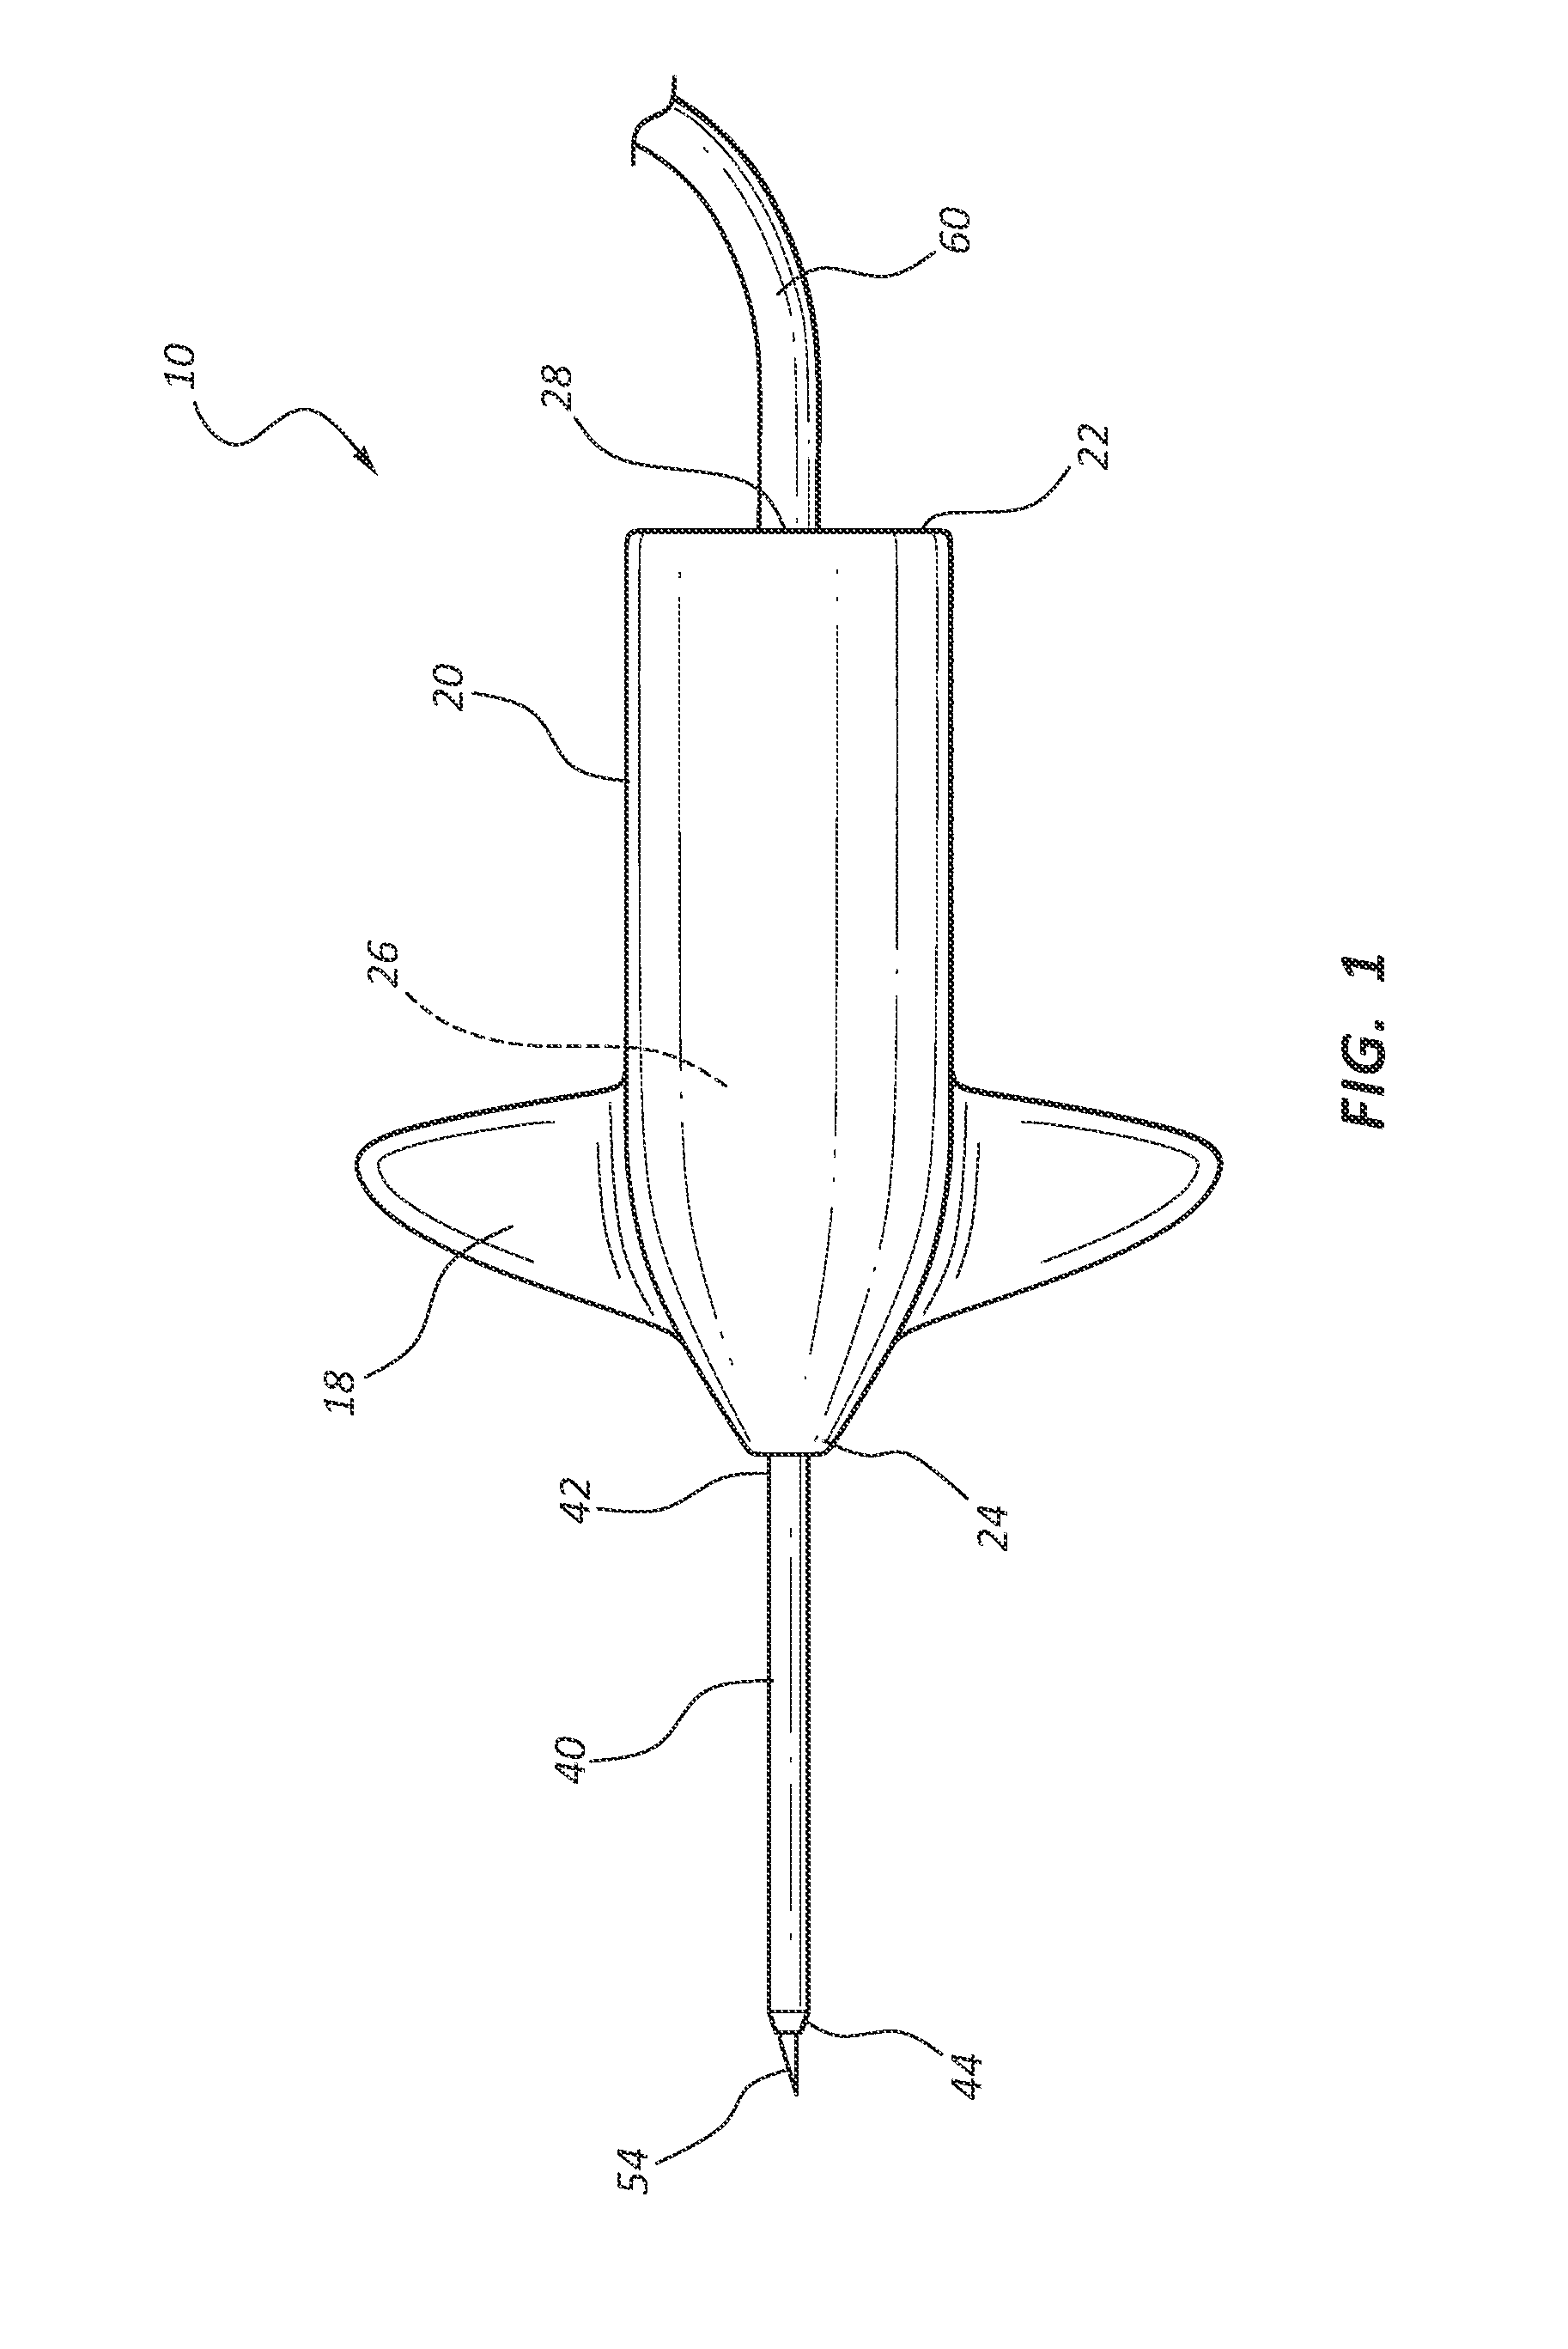 Over-the-needle intravenous catheter assembly with integrated intravenous tubing